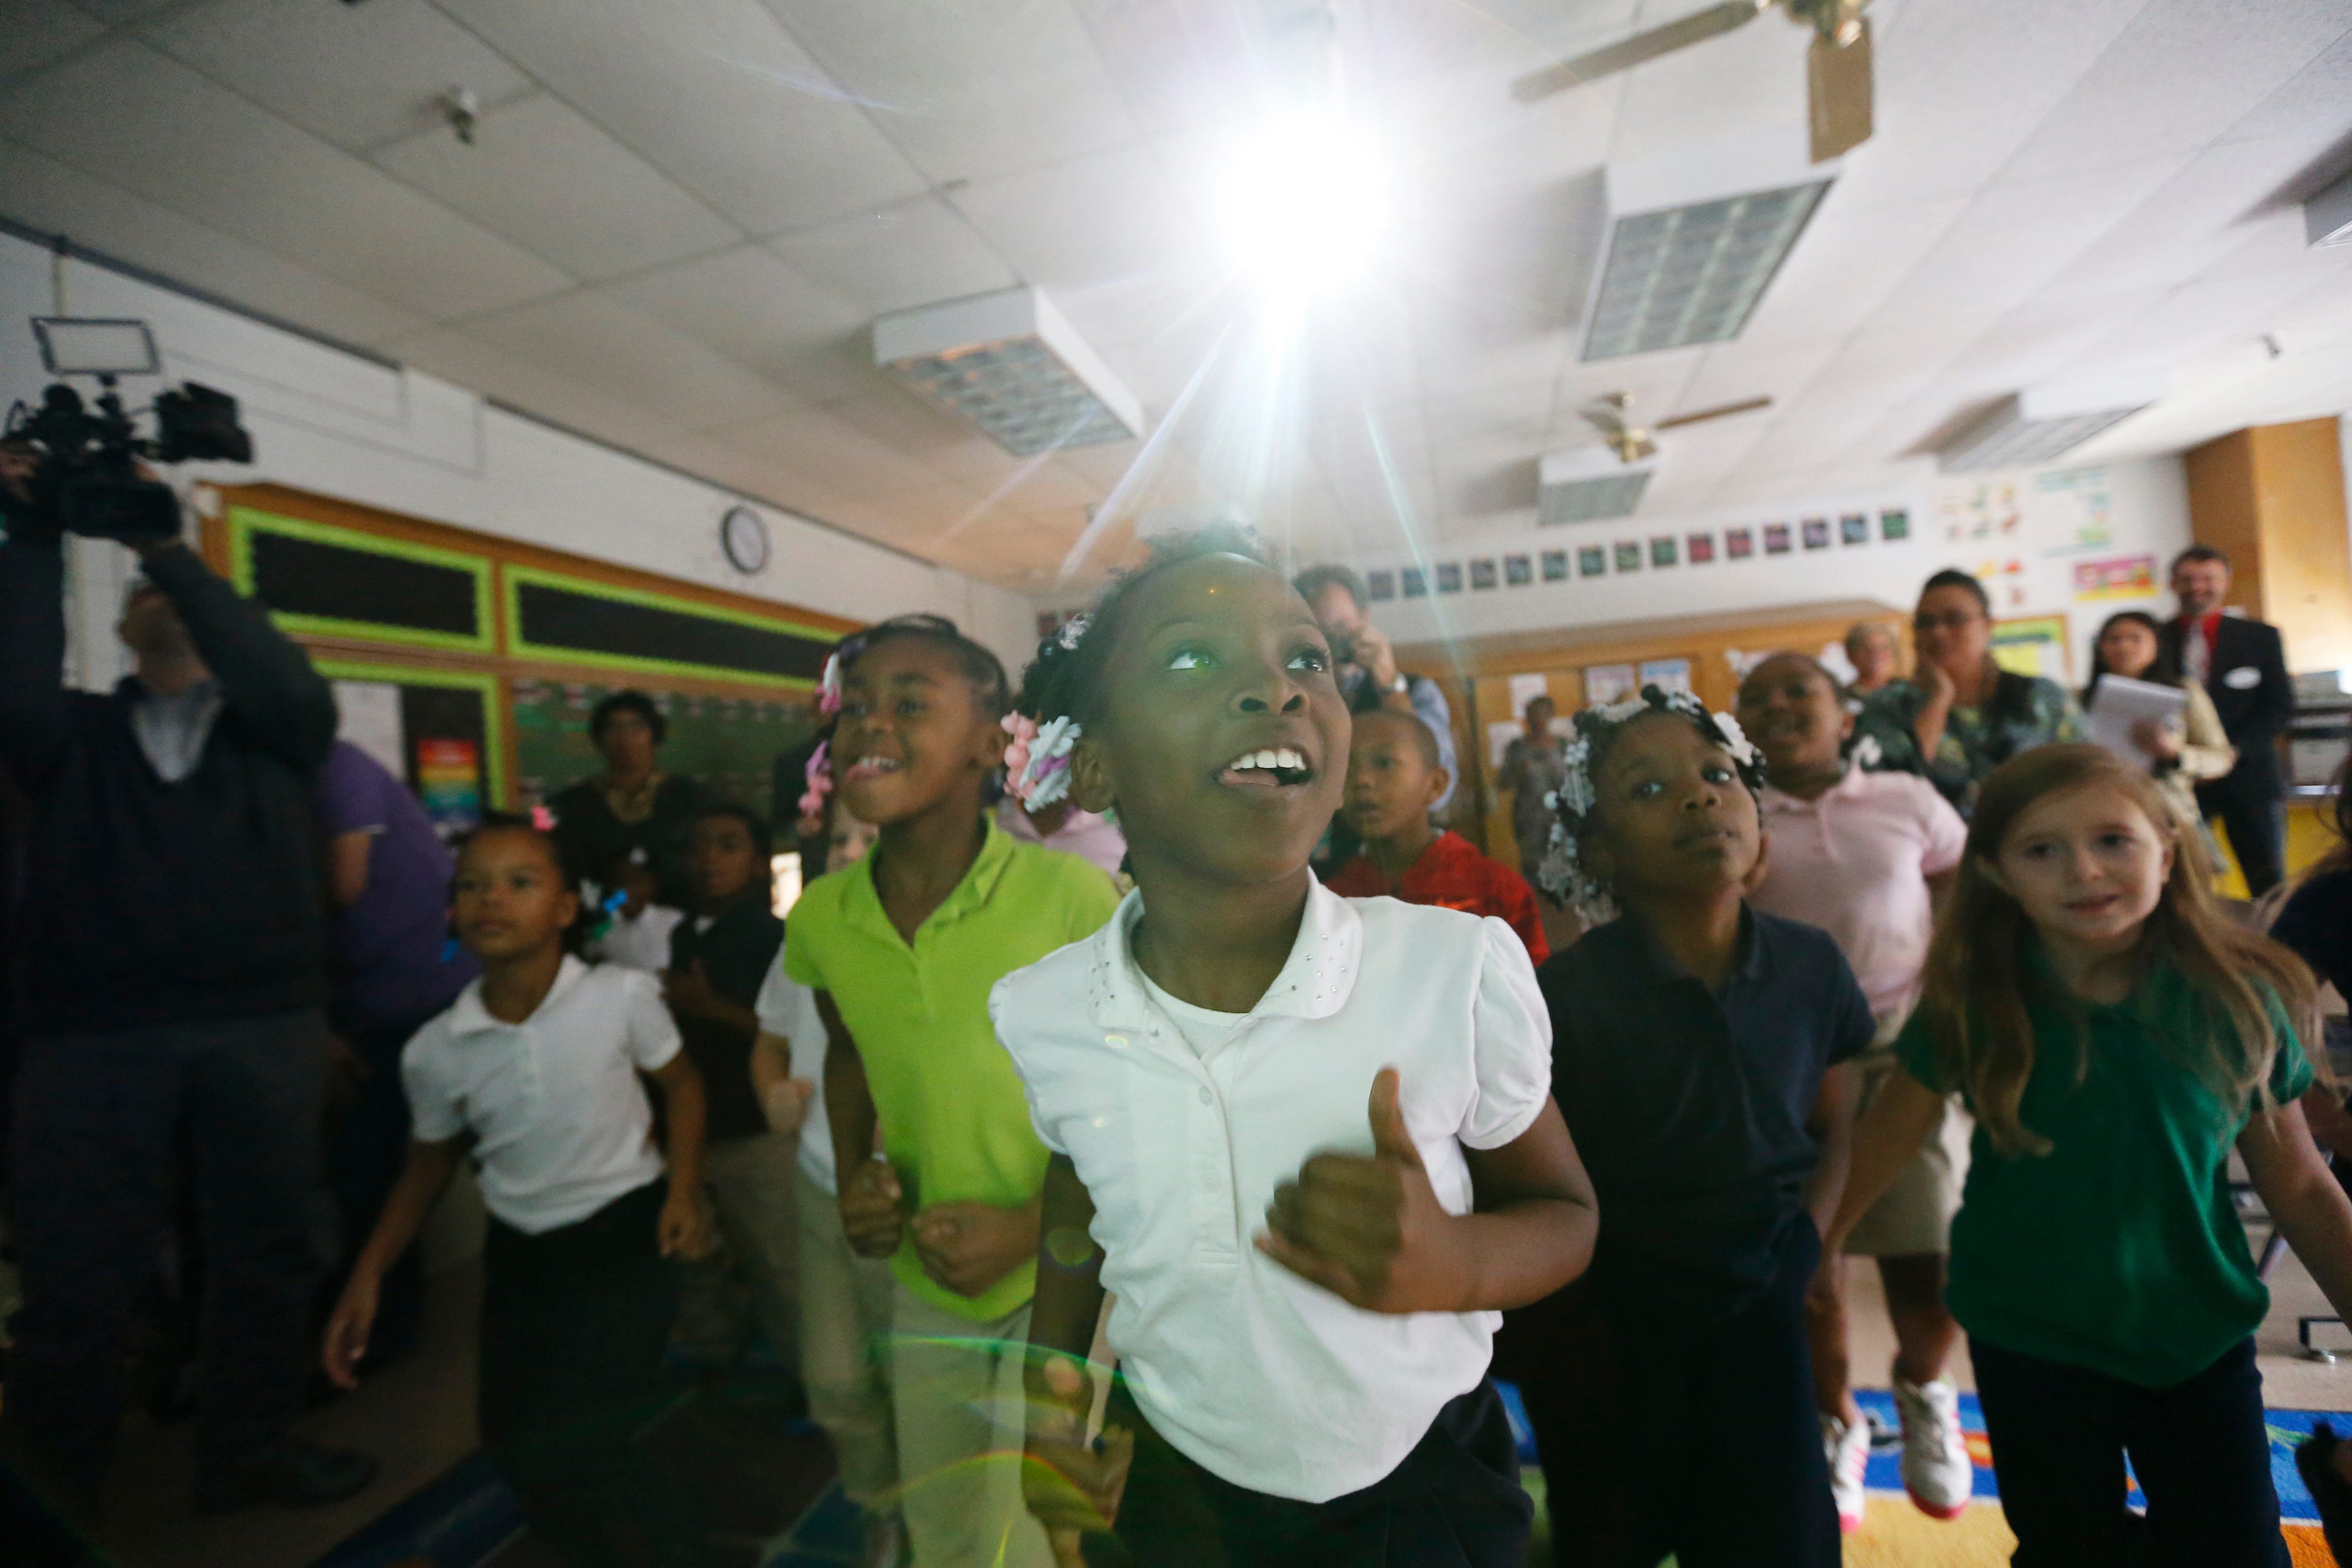 SaLiyah Knox, center, in white, and fellow second graders at Byck Elementary School danced to a video as part of the goNoodle program in Jefferson County Schools. Byck, like most elementary schools in Louisville's West End, has become increasingly segregated by race and class over the past decade.